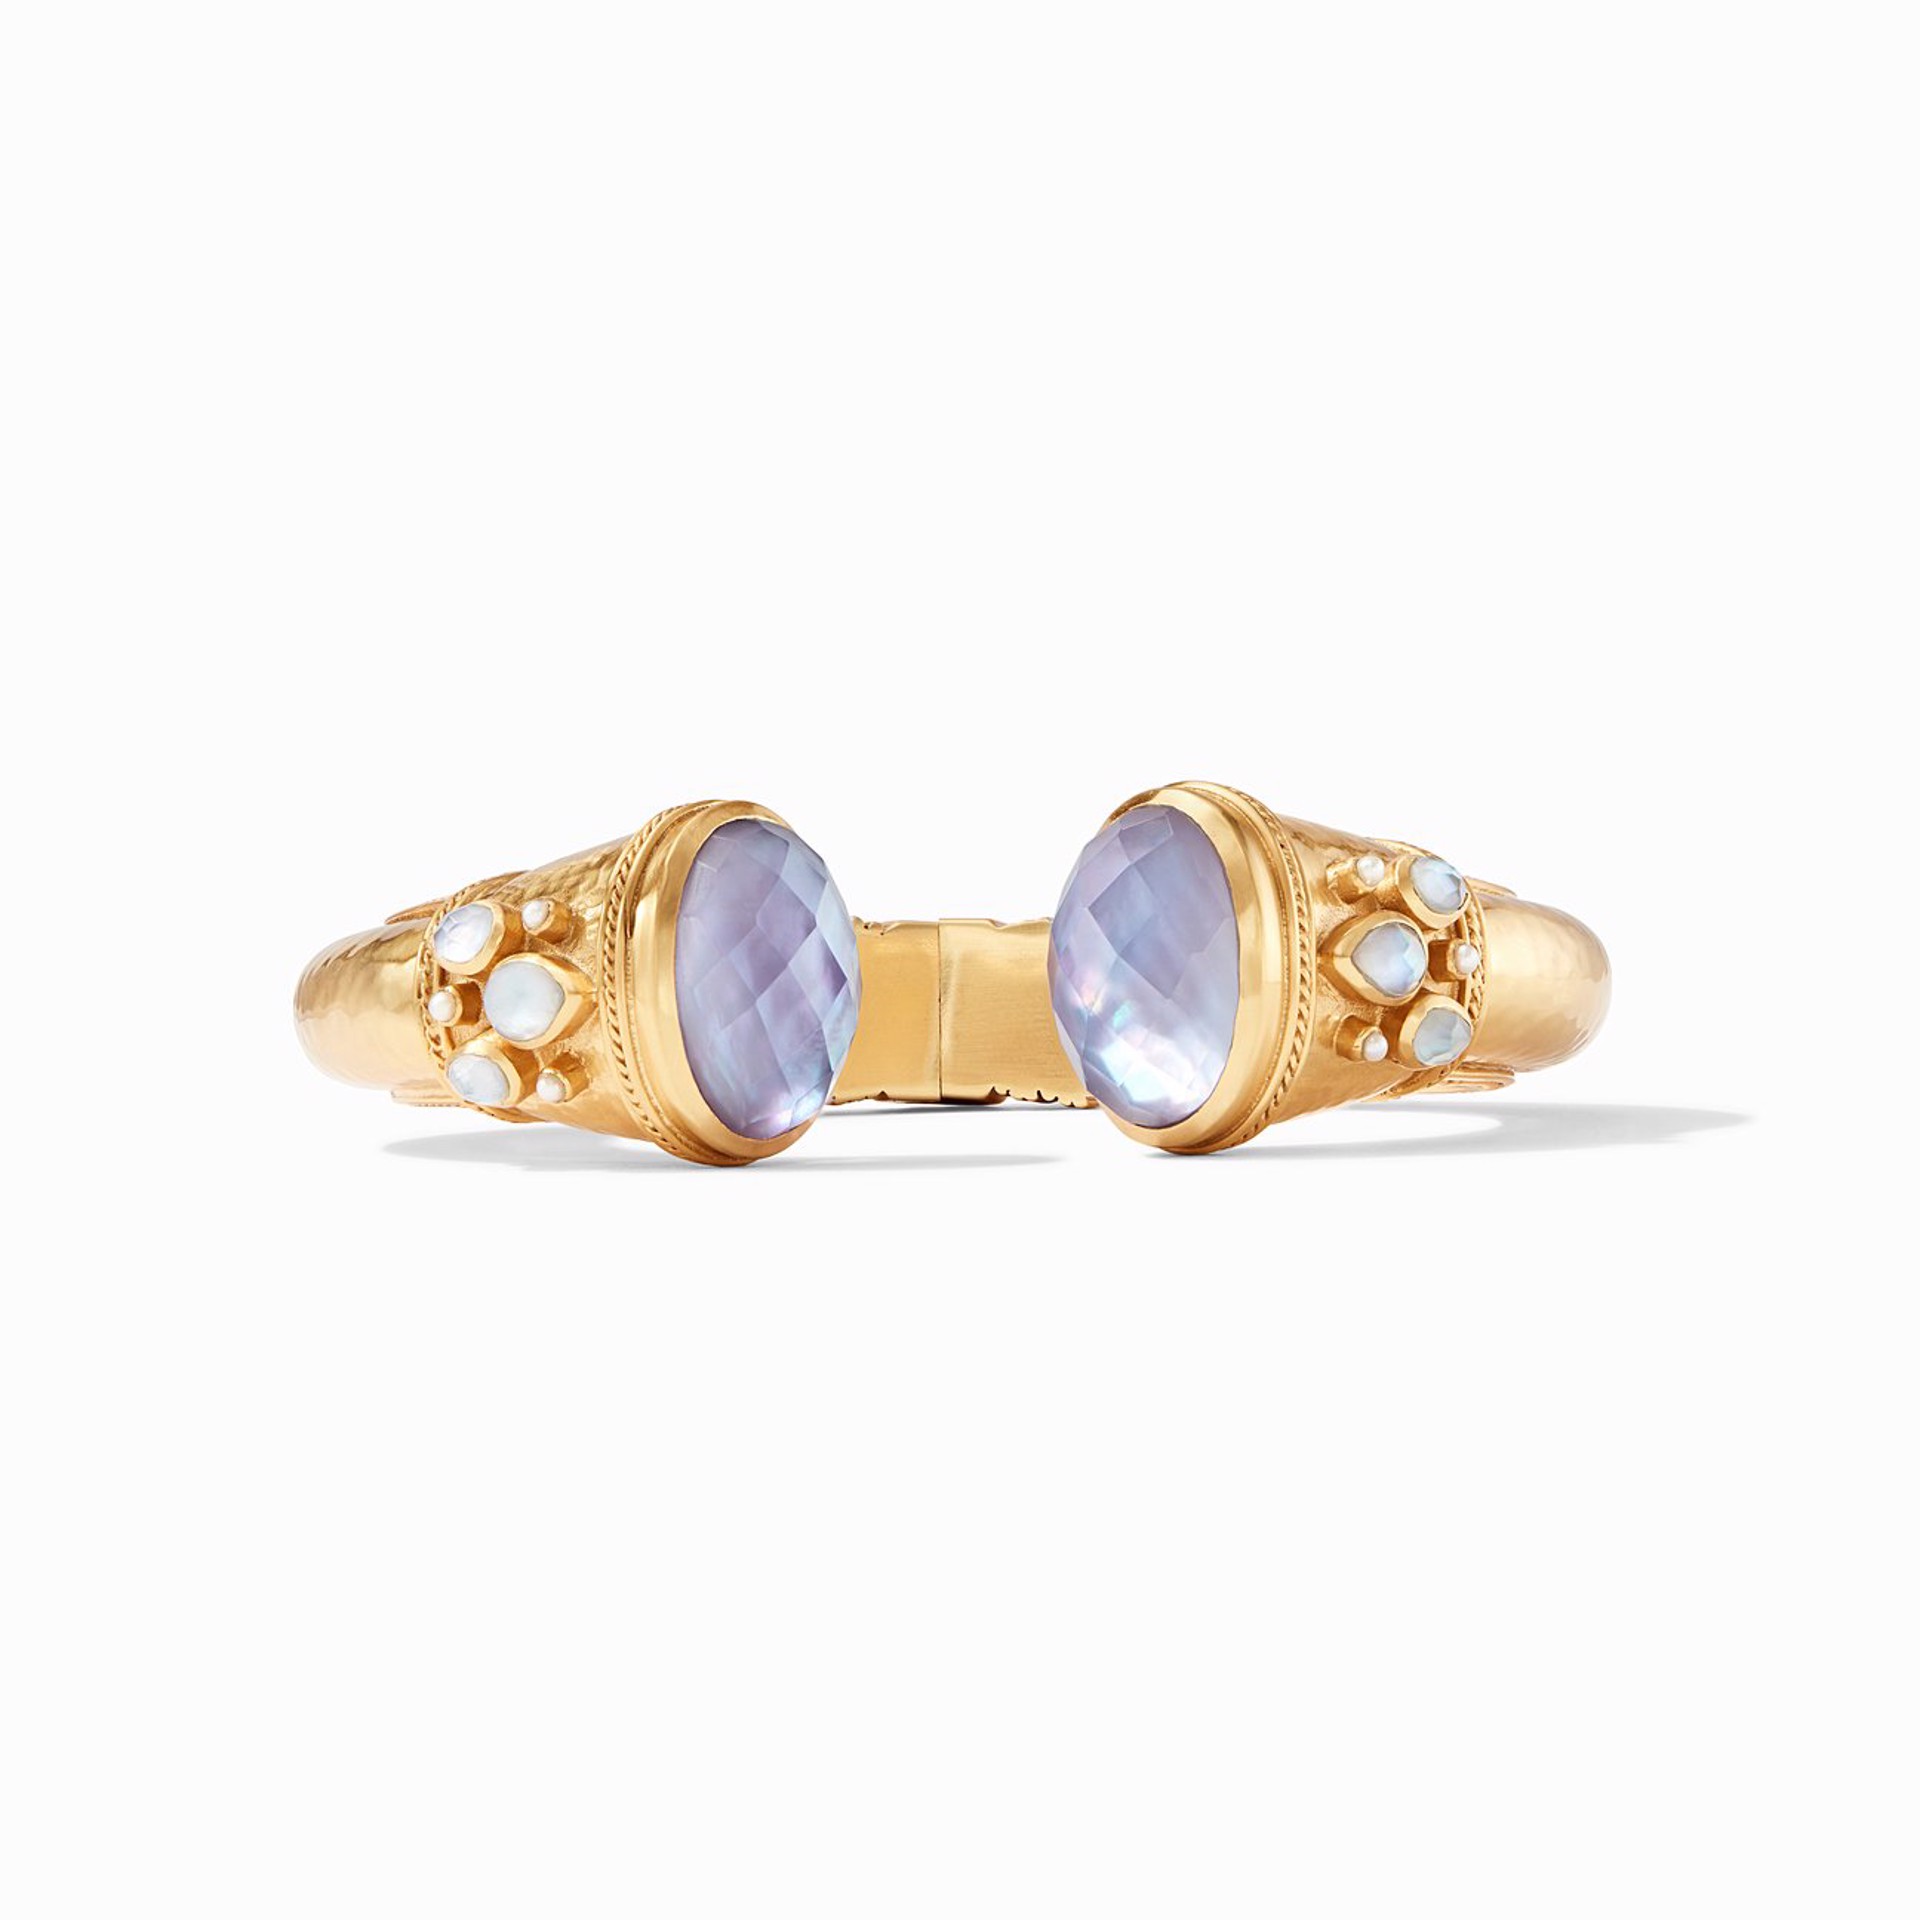 Cannes Hinge Cuff - Iridescent Lavender by Julie Vos